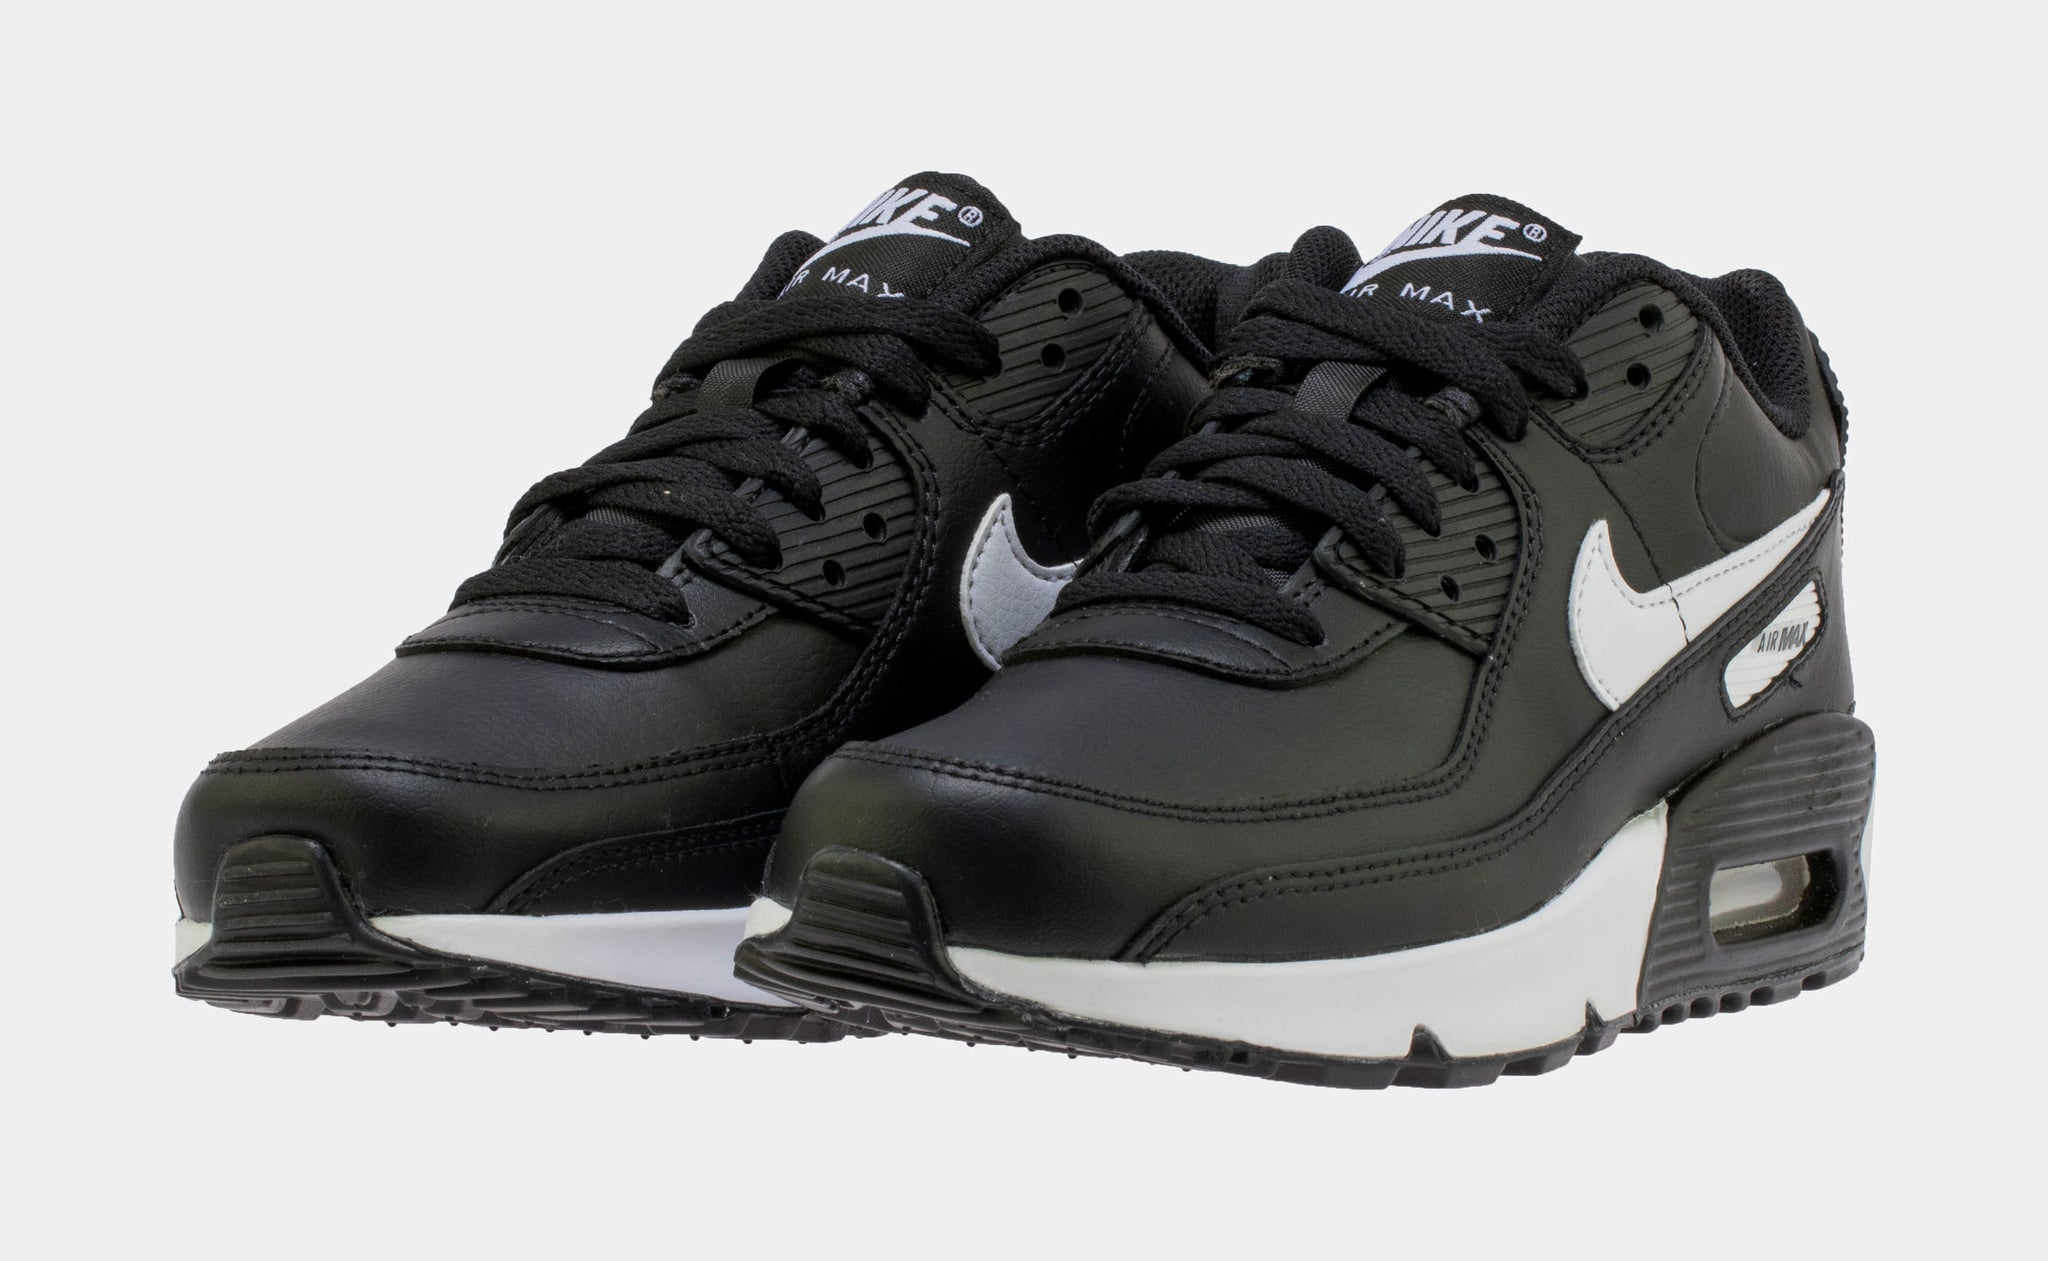 Nike Air Max 90 365 Leather School Running Shoes Black CD6864-010 – Palace